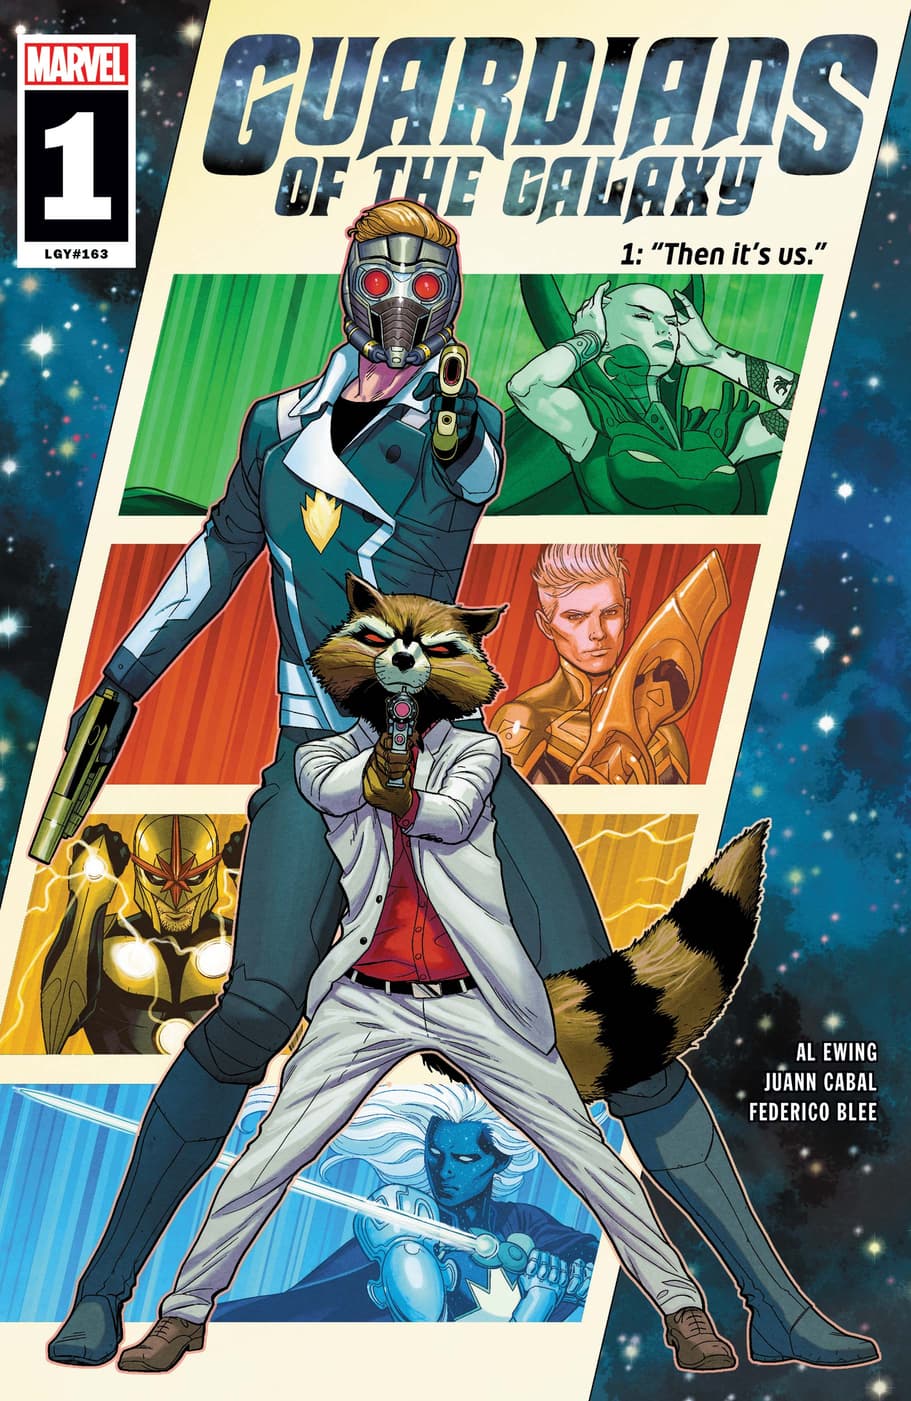 Guardians of the Galaxy (2020) #1